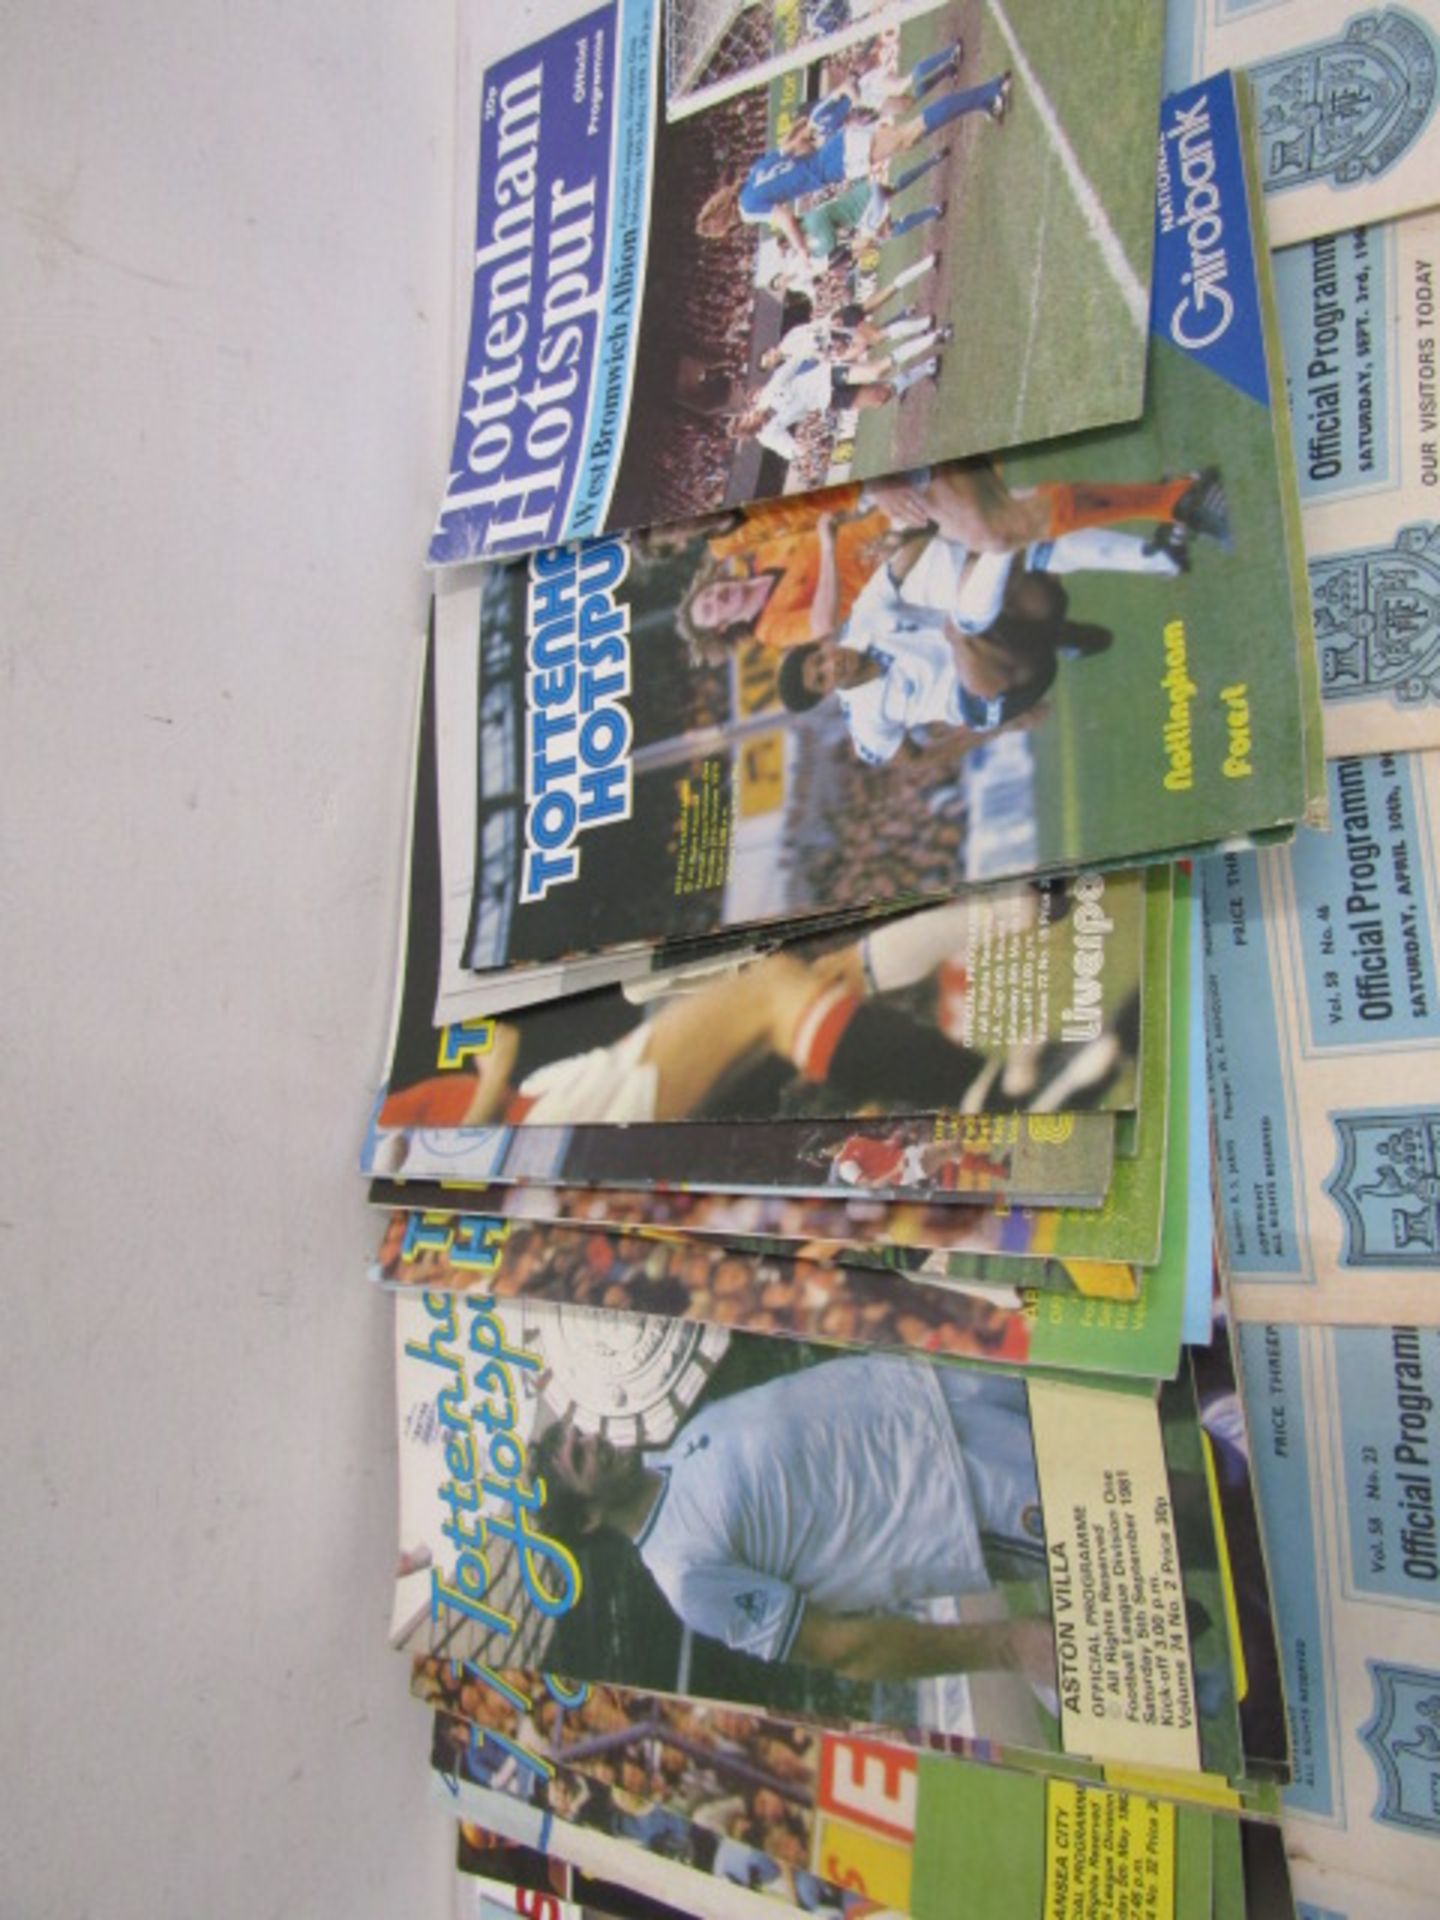 Tottenham Hot Spurs vintage programmes, 6 with original tickets plus 2 Stevenage with ticket and one - Image 7 of 10